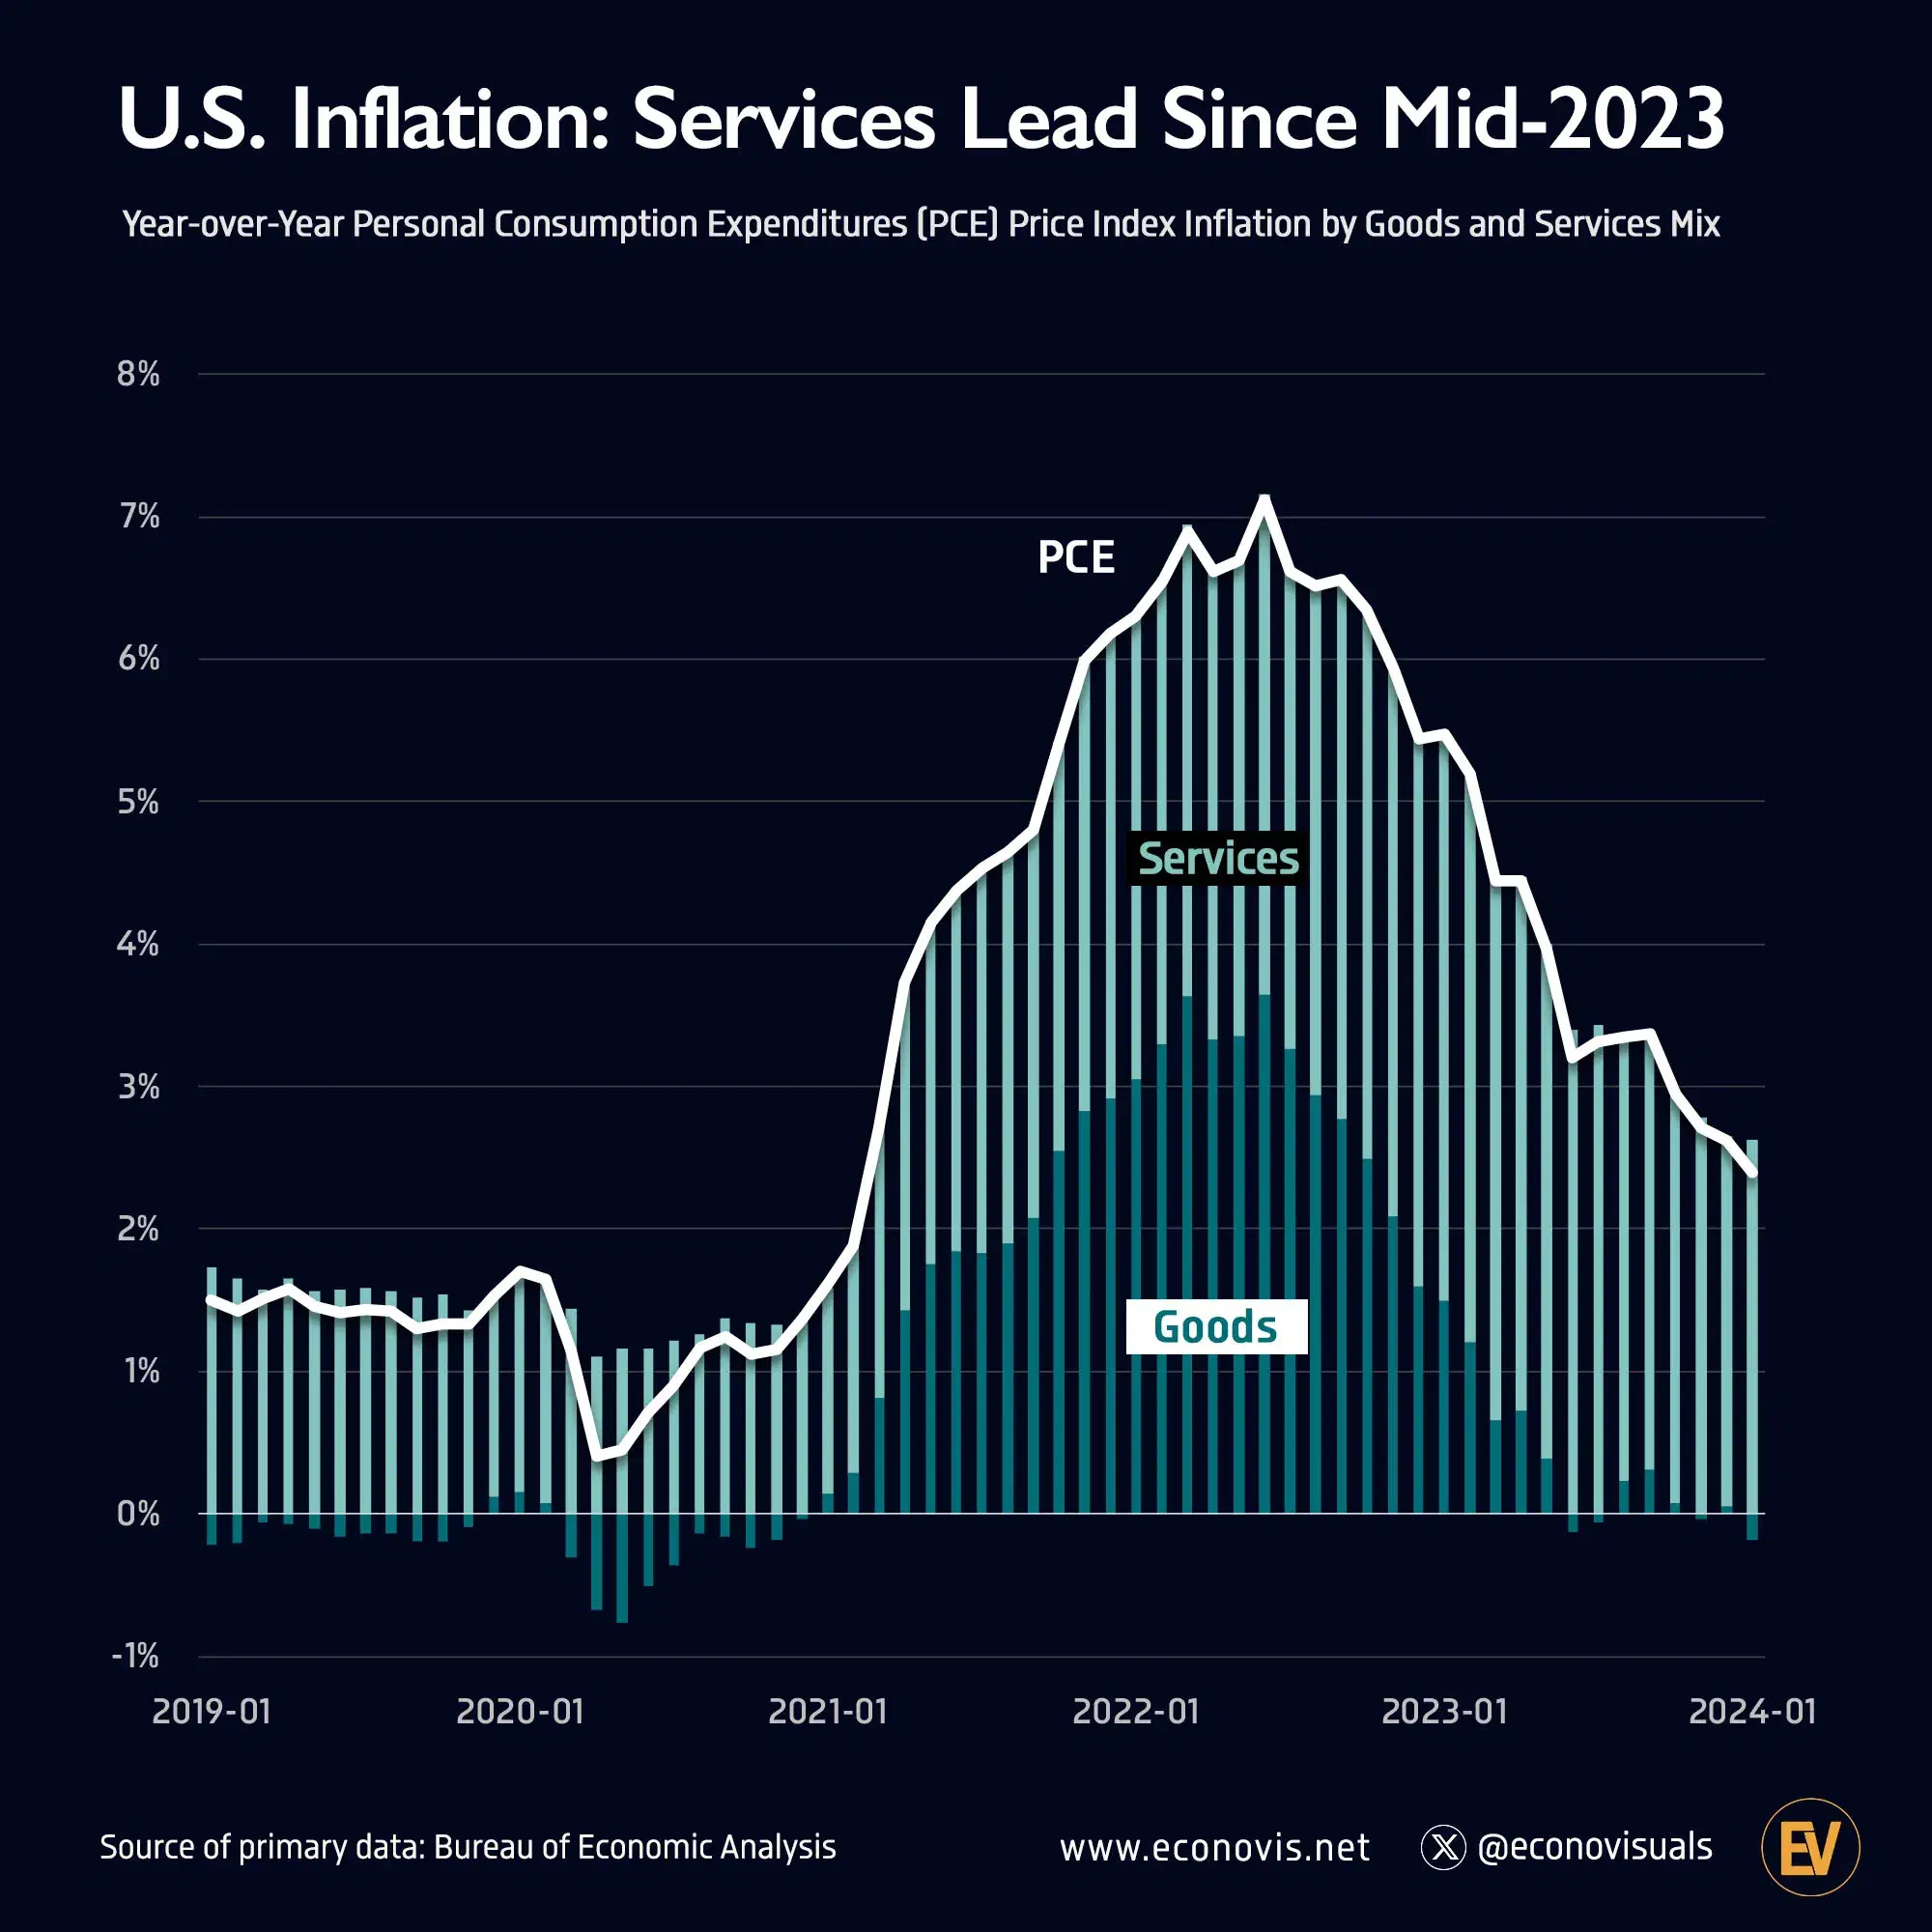 U.S. Inflation: Services Lead Since Mid-2023